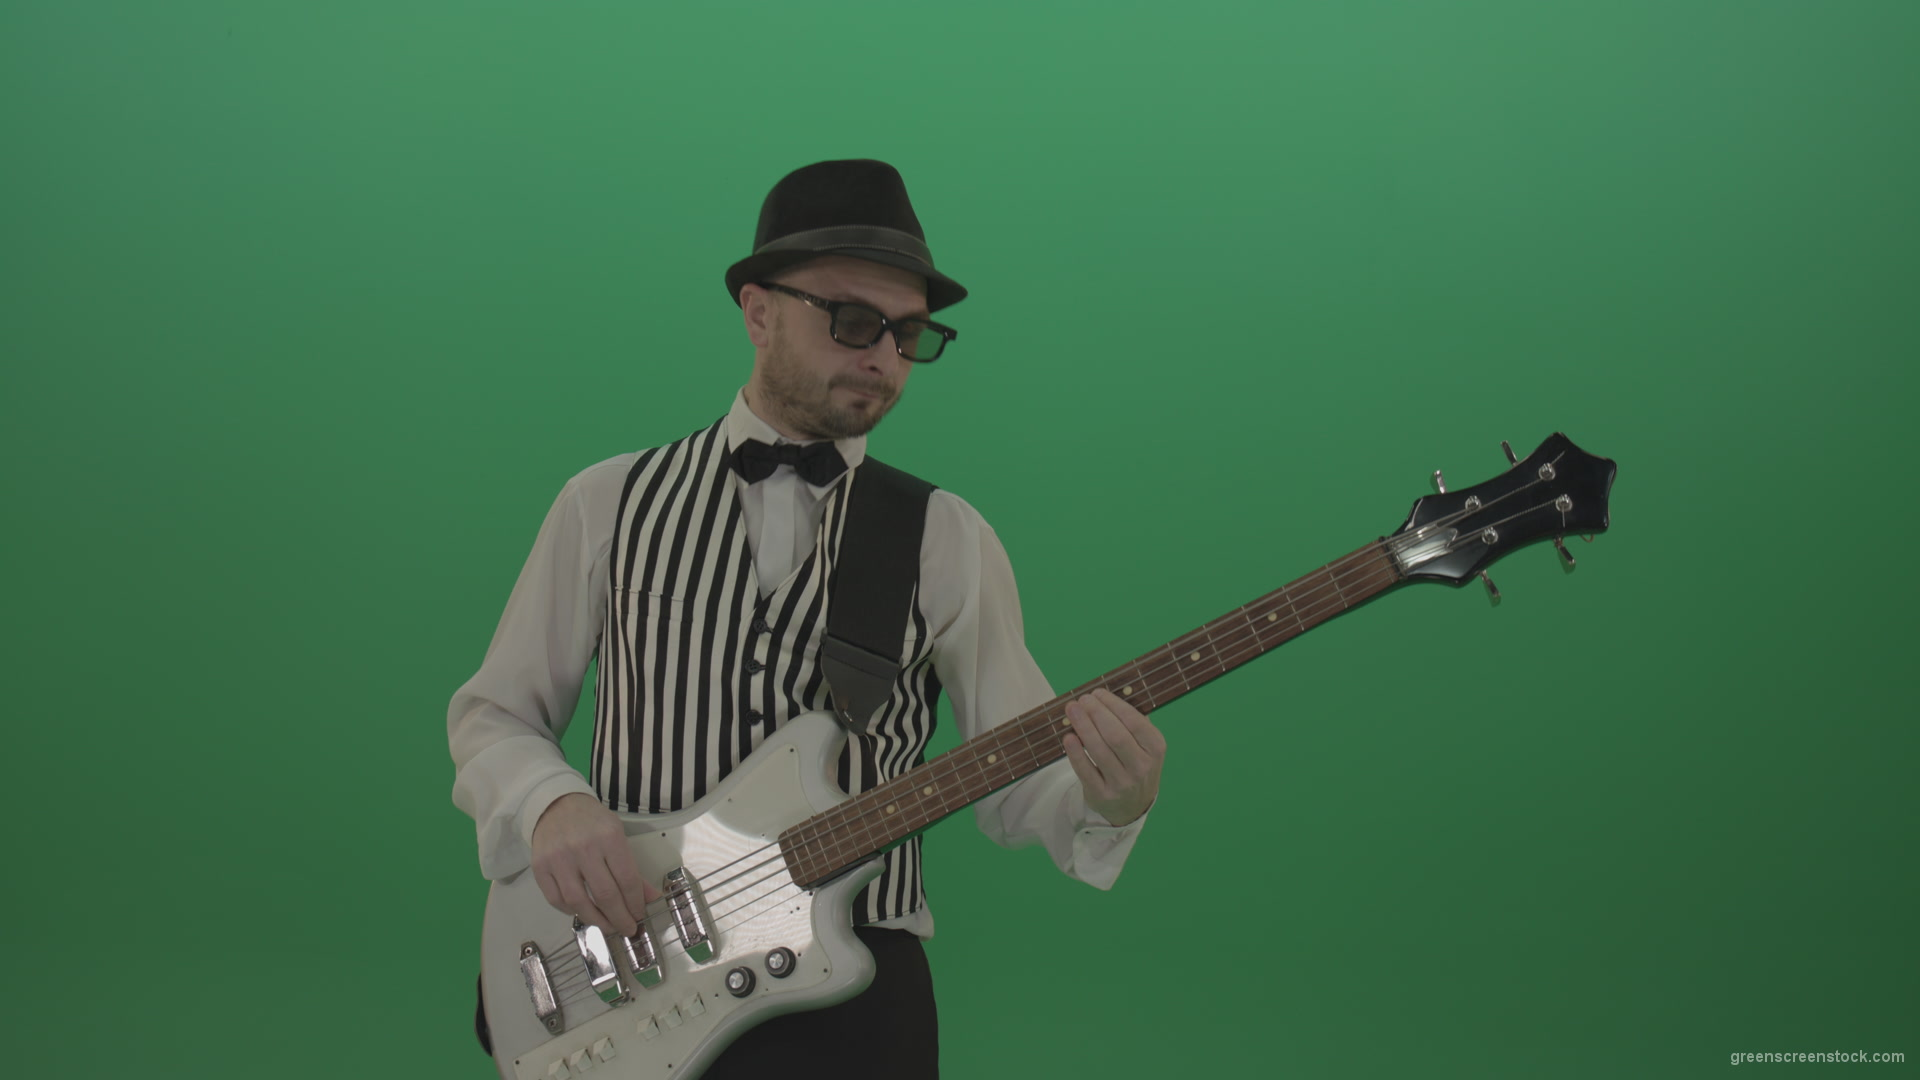 Guitar-player-browses-the-bass-guitar-playing-solo-and-charismatically-shows-facial-expressions_008 Green Screen Stock